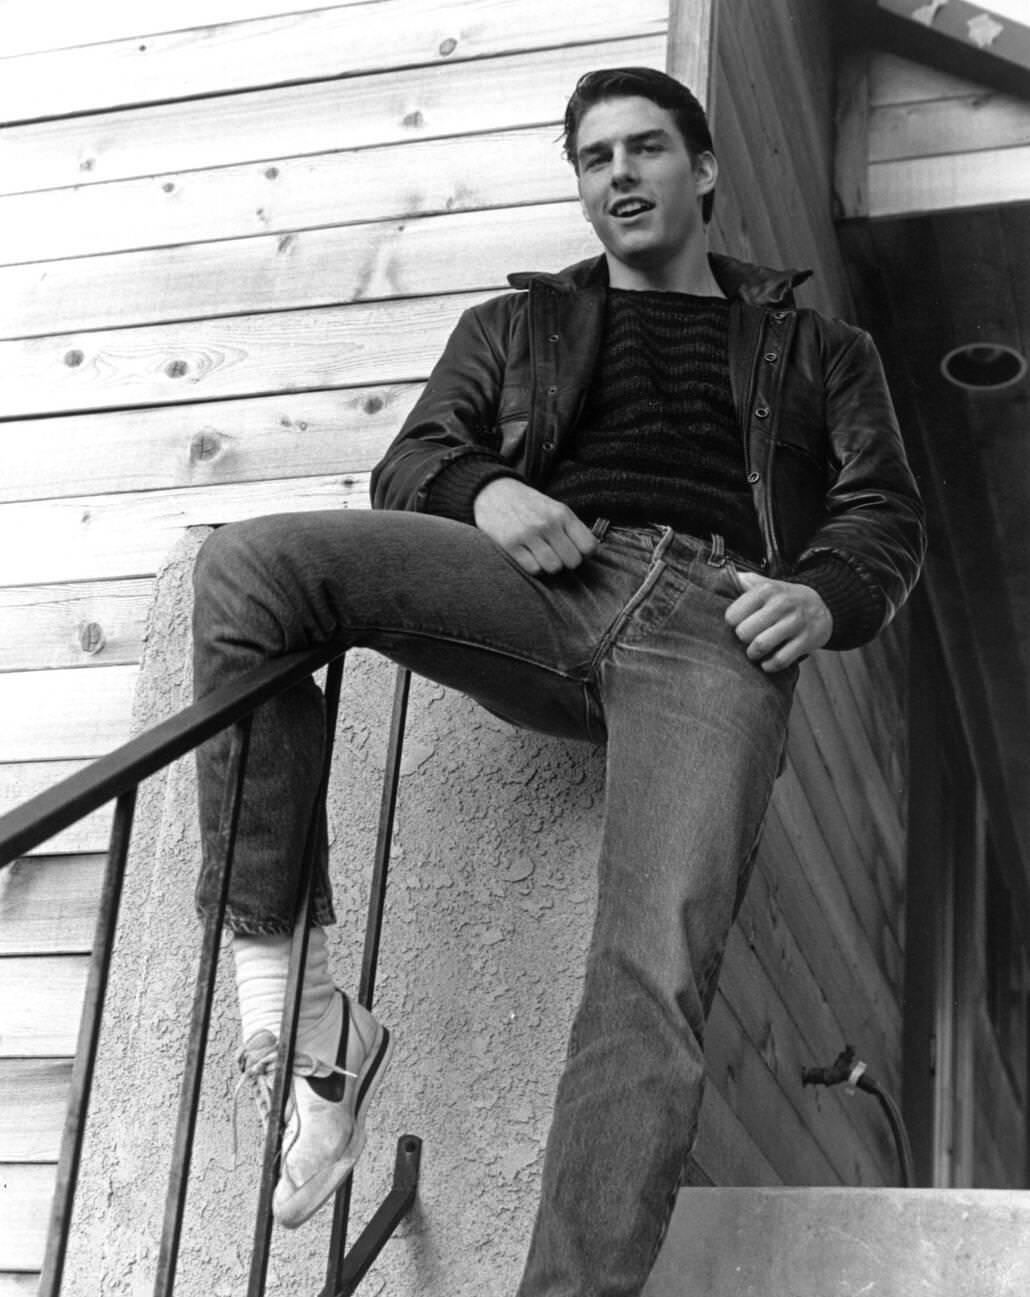 Scene from "The Outsiders" (1983) featuring Tom Cruise as Steve Randle.